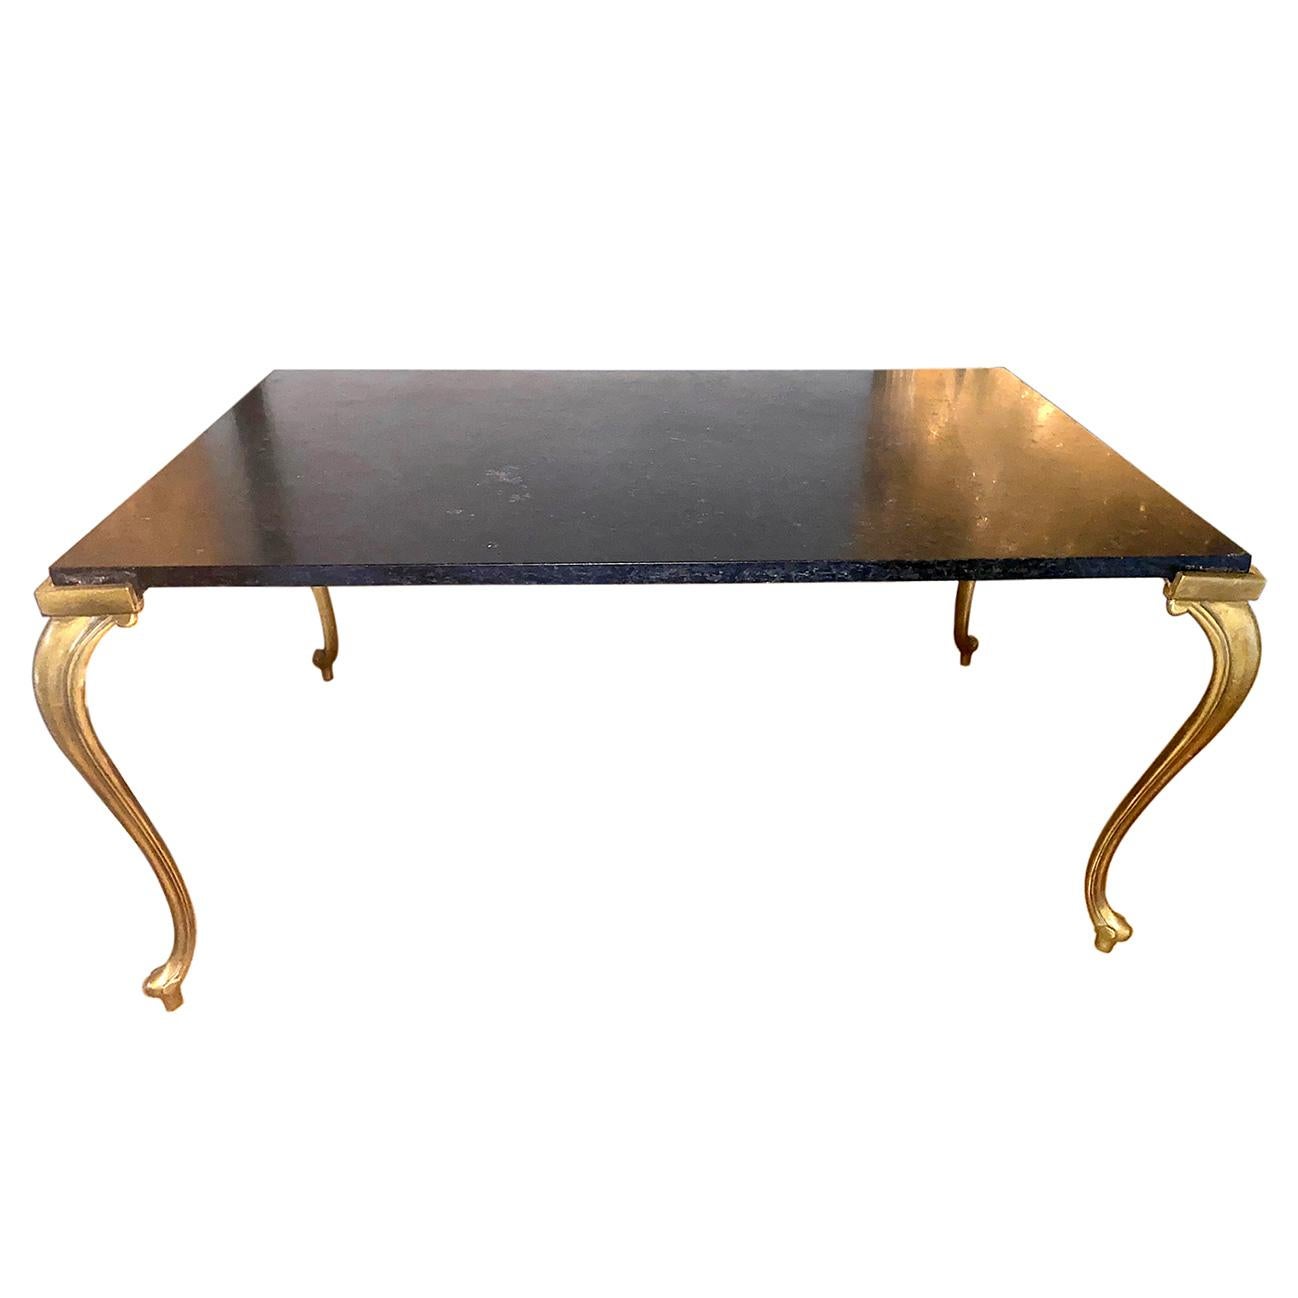 A circa 1950s French marble-top coffee table with gilt bronze legs.

Measurements:
Height 17.5